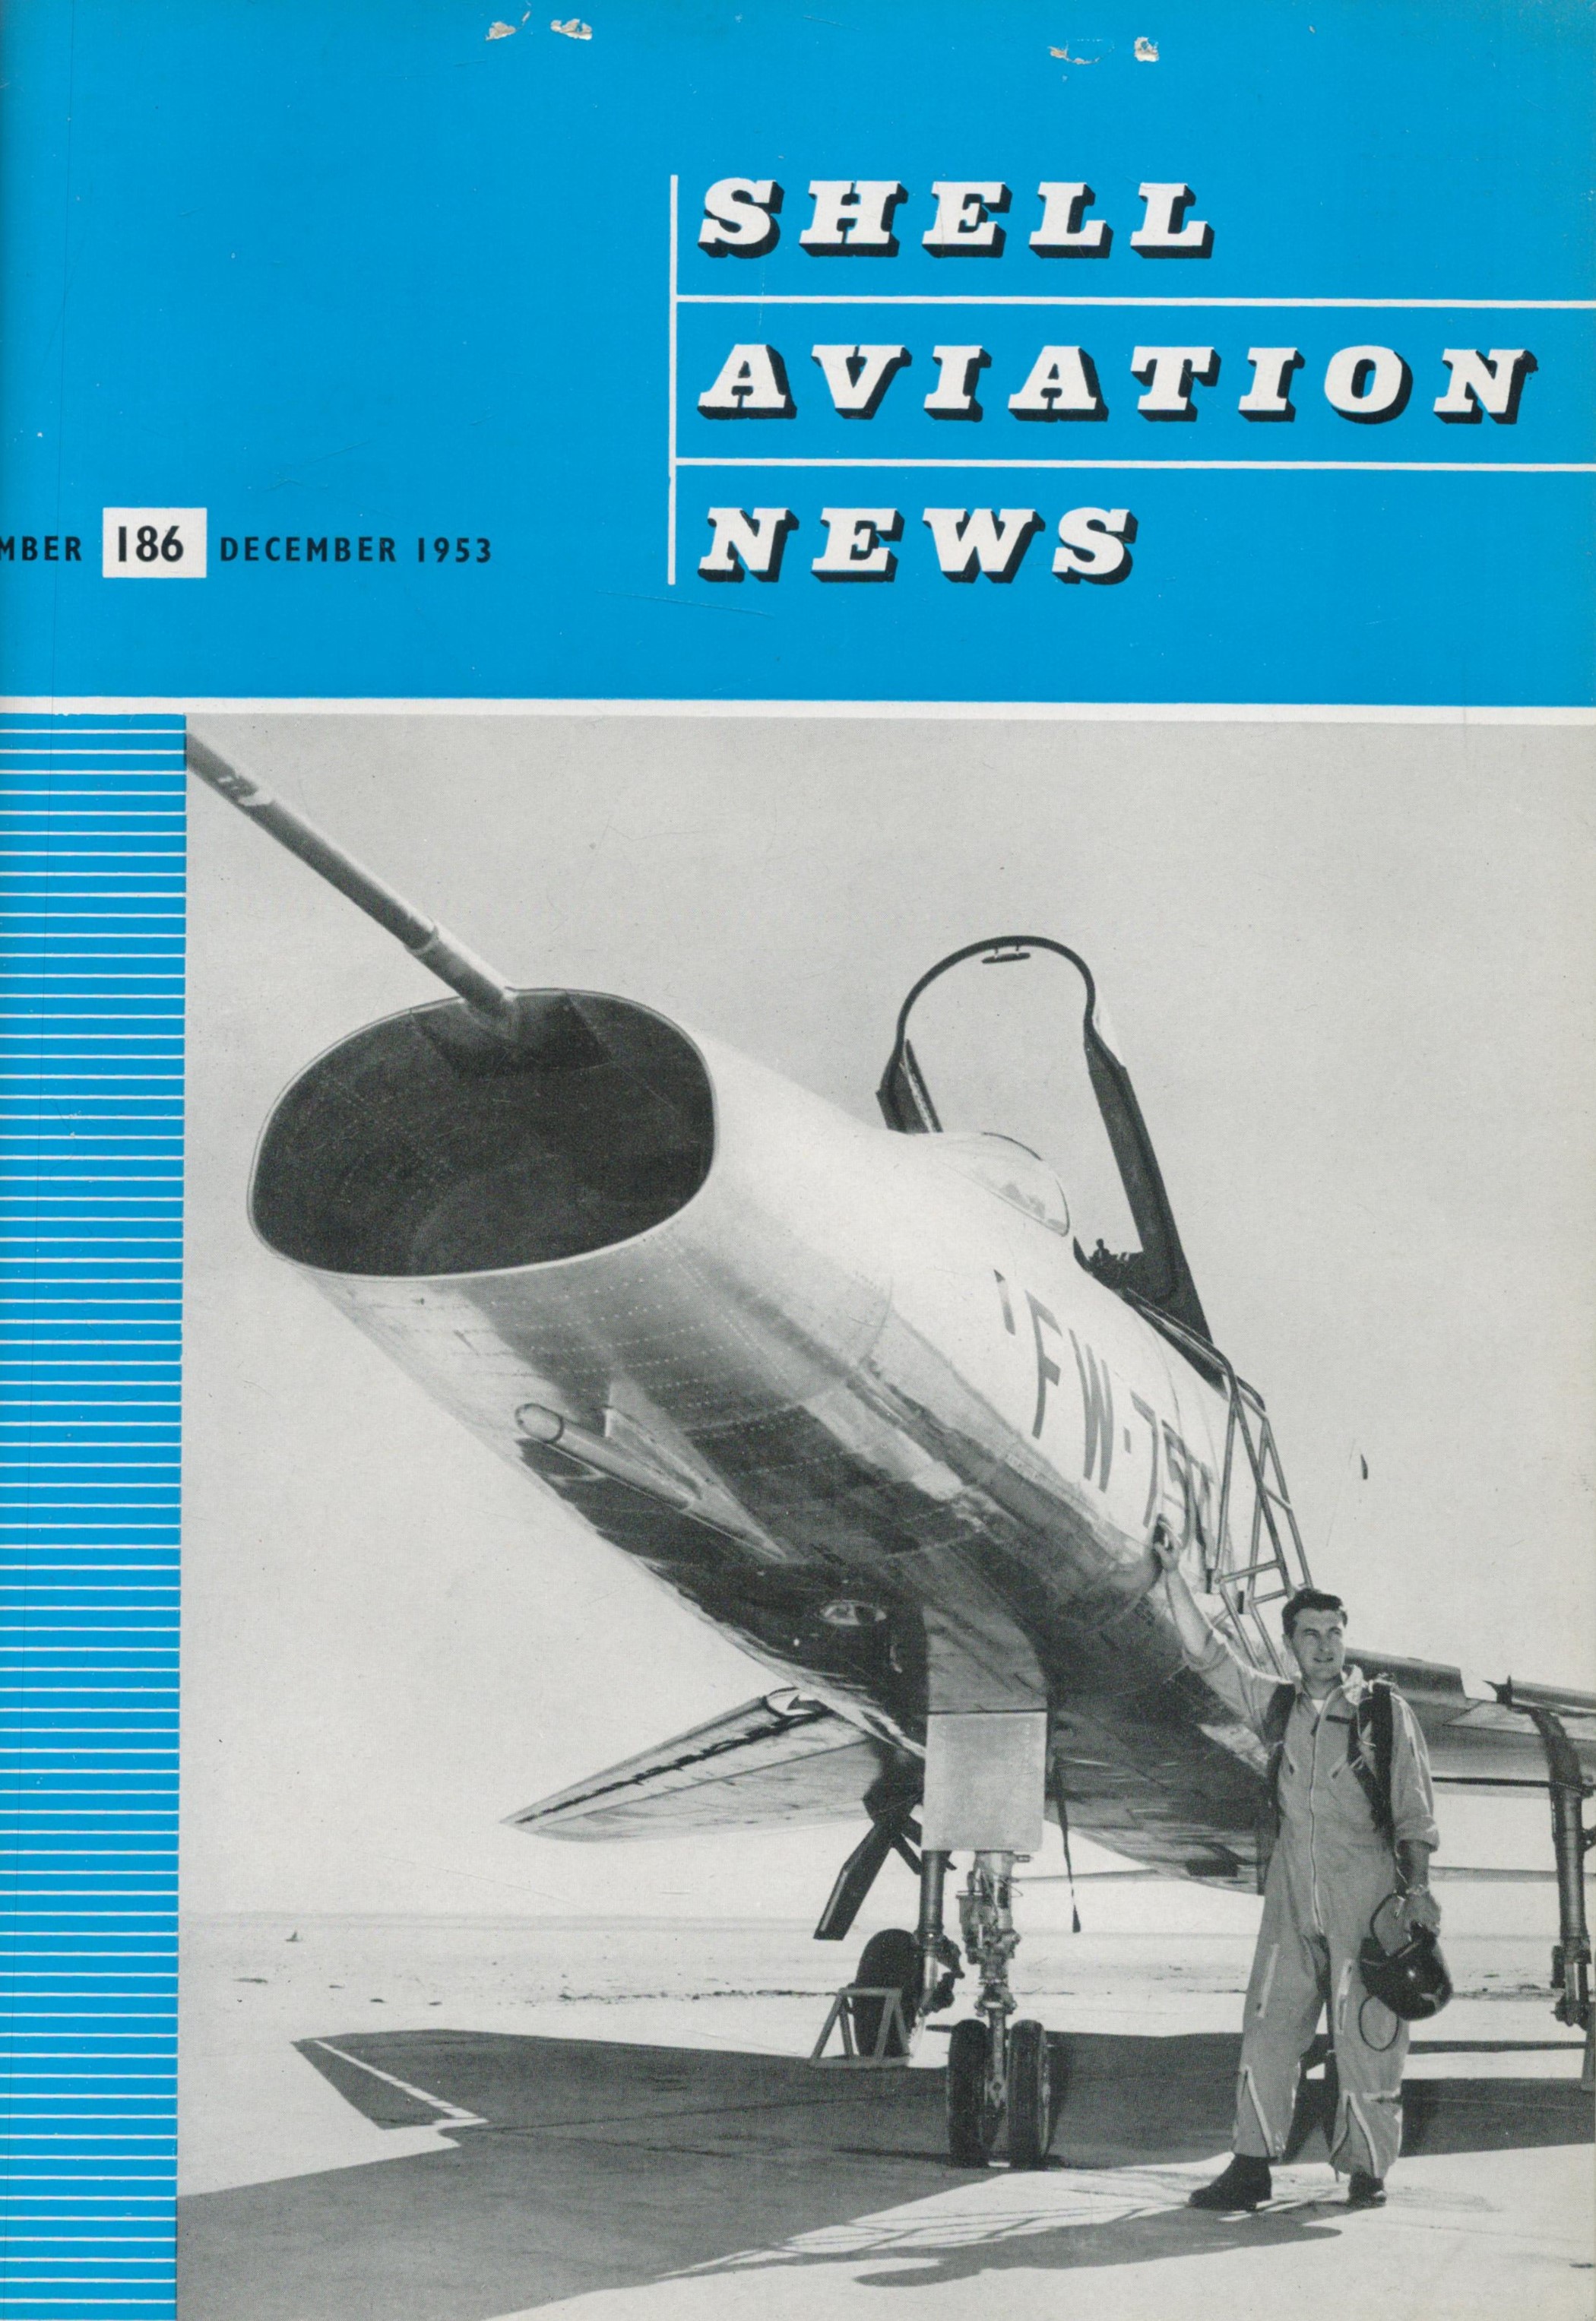 Shell Aviation News Jan 1951 to Dec 1952 and Jan to Dec 1953 unsigned Hardbacked Books Published - Image 3 of 4